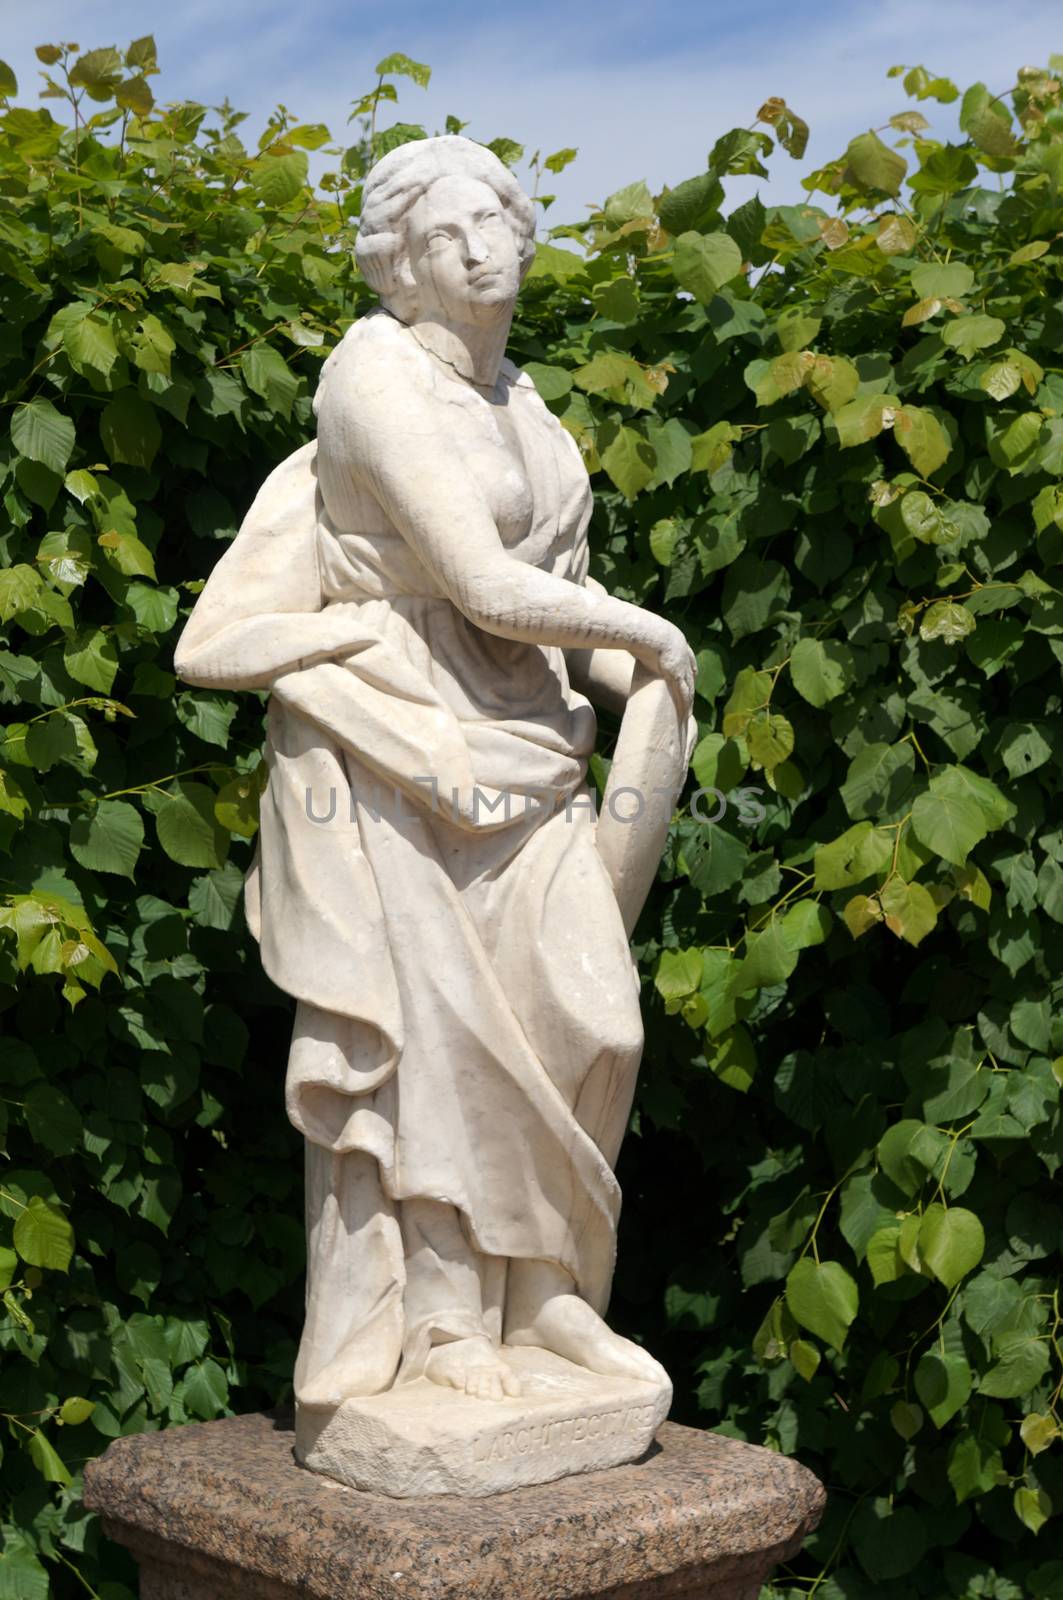 Marble sculpture in the park by Chiffanna